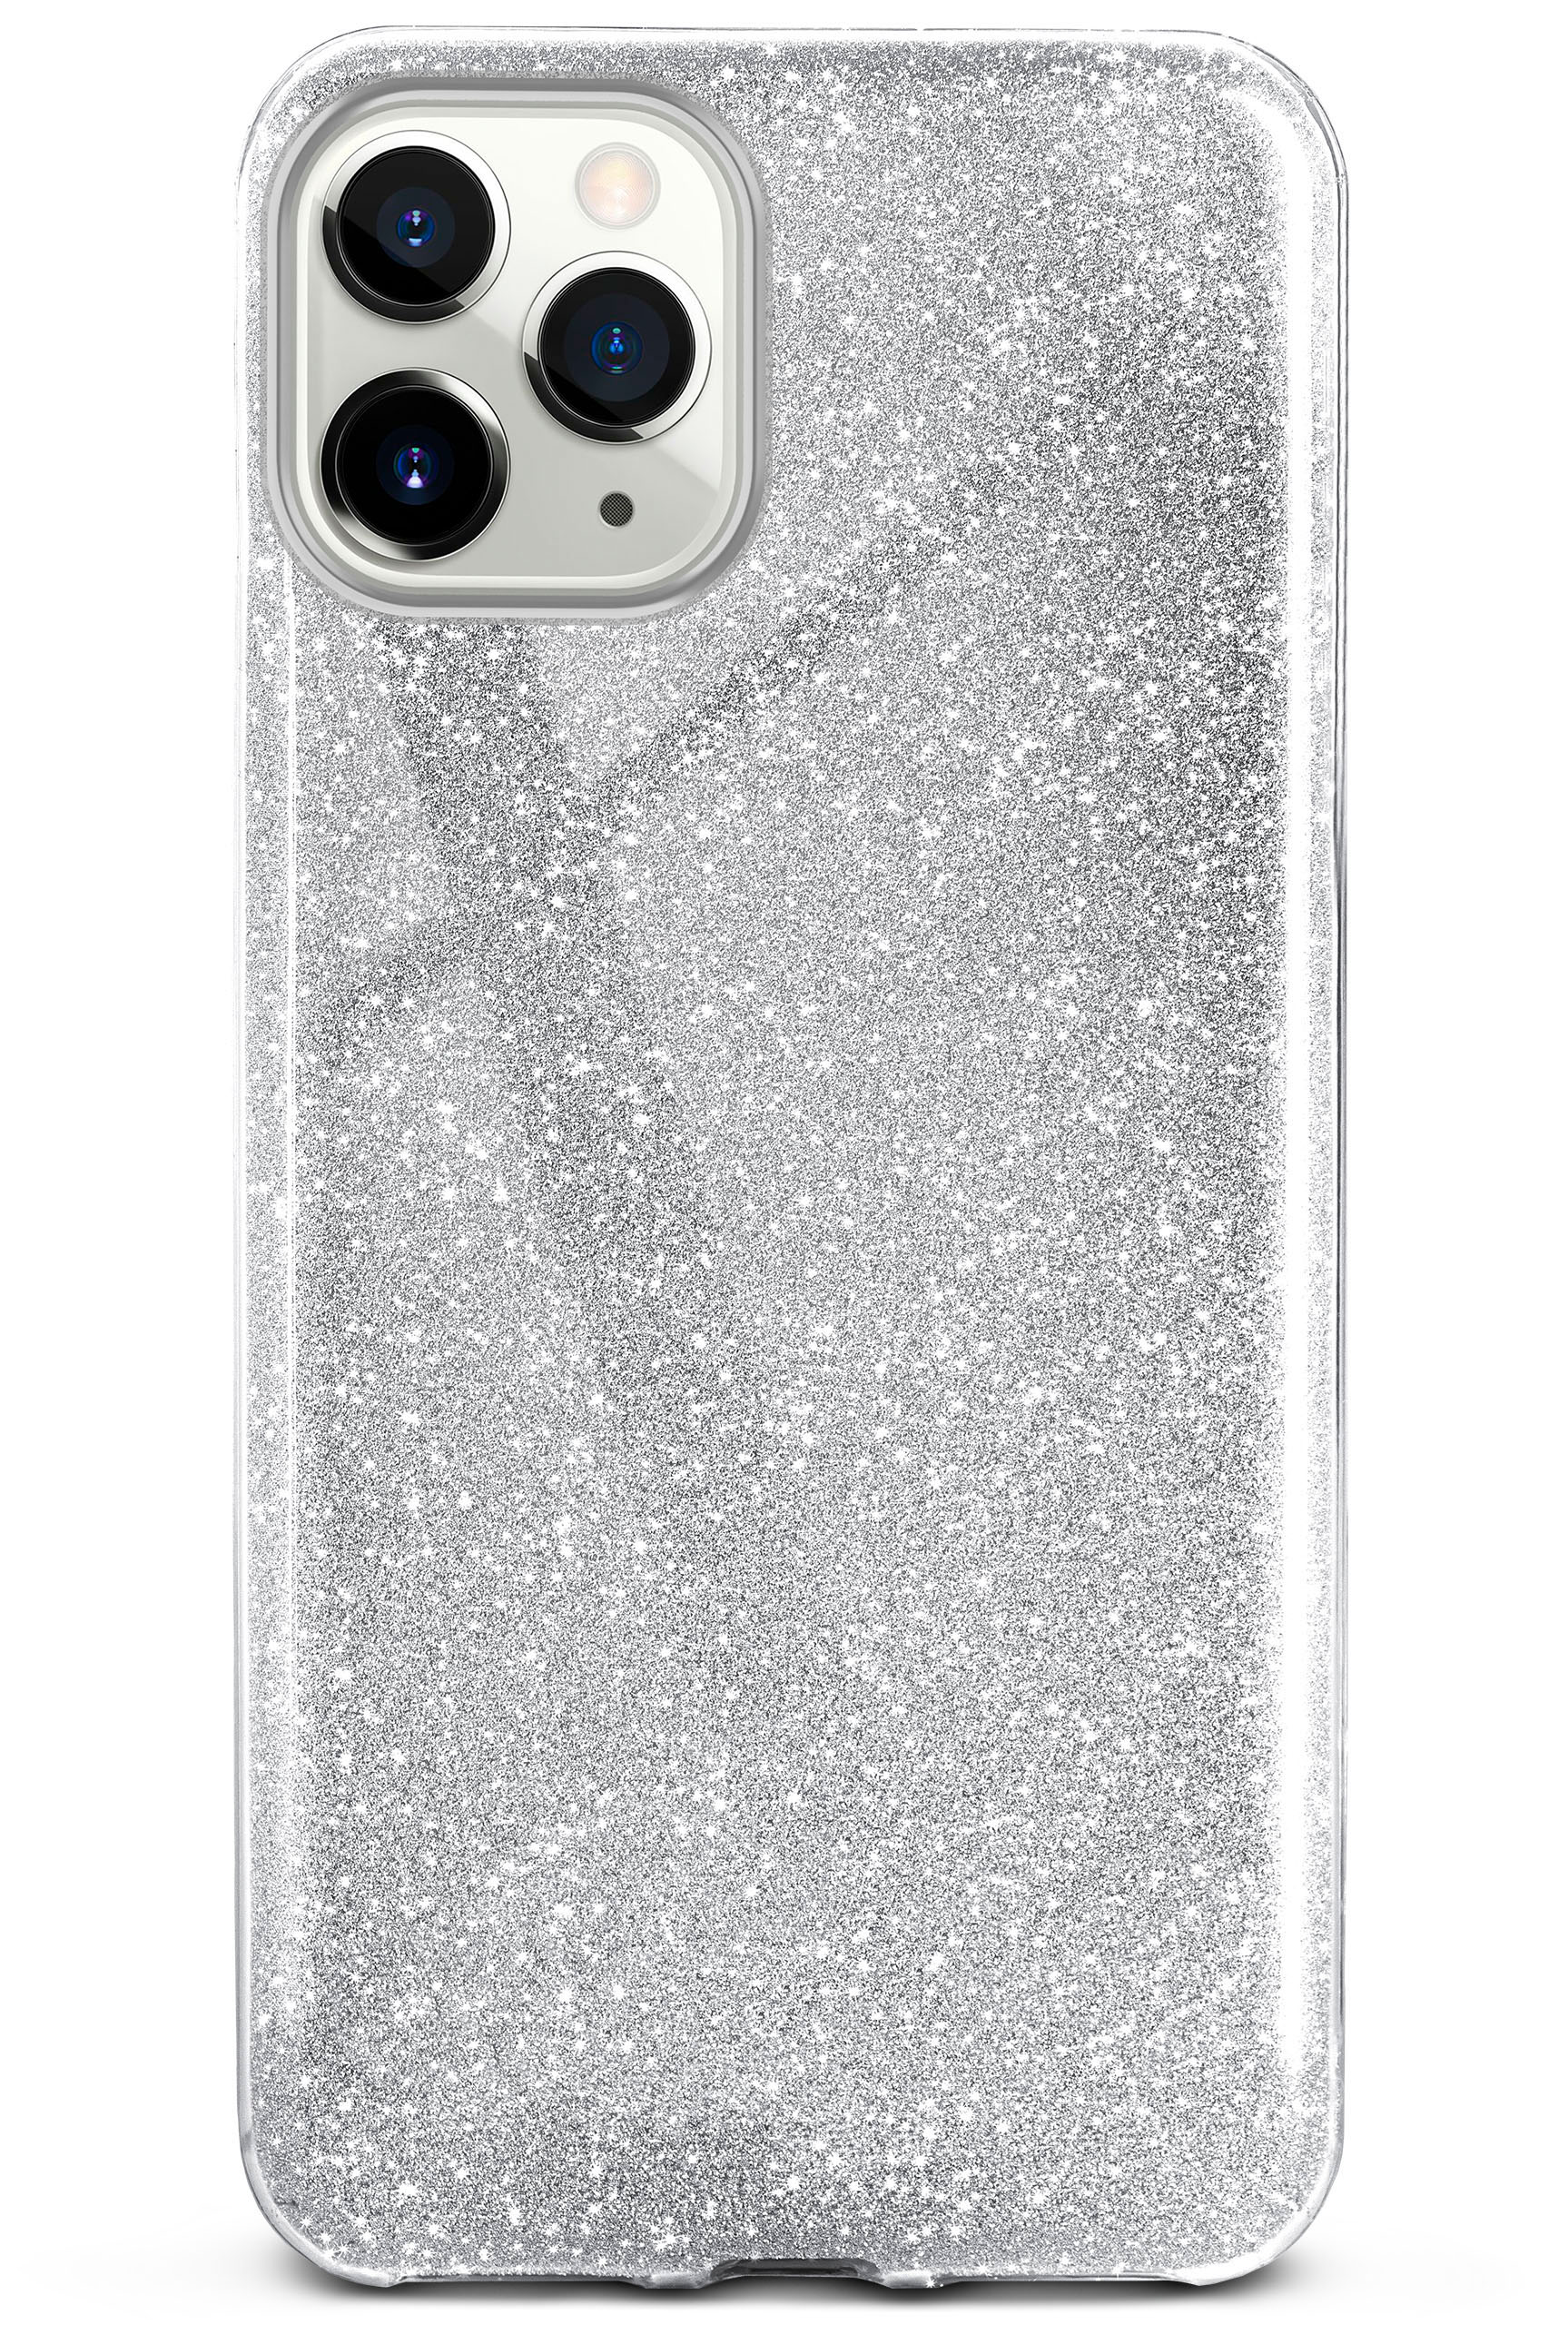 Case, Glitter iPhone ONEFLOW Silver Sparkle - Apple, Max, Pro Backcover, 11